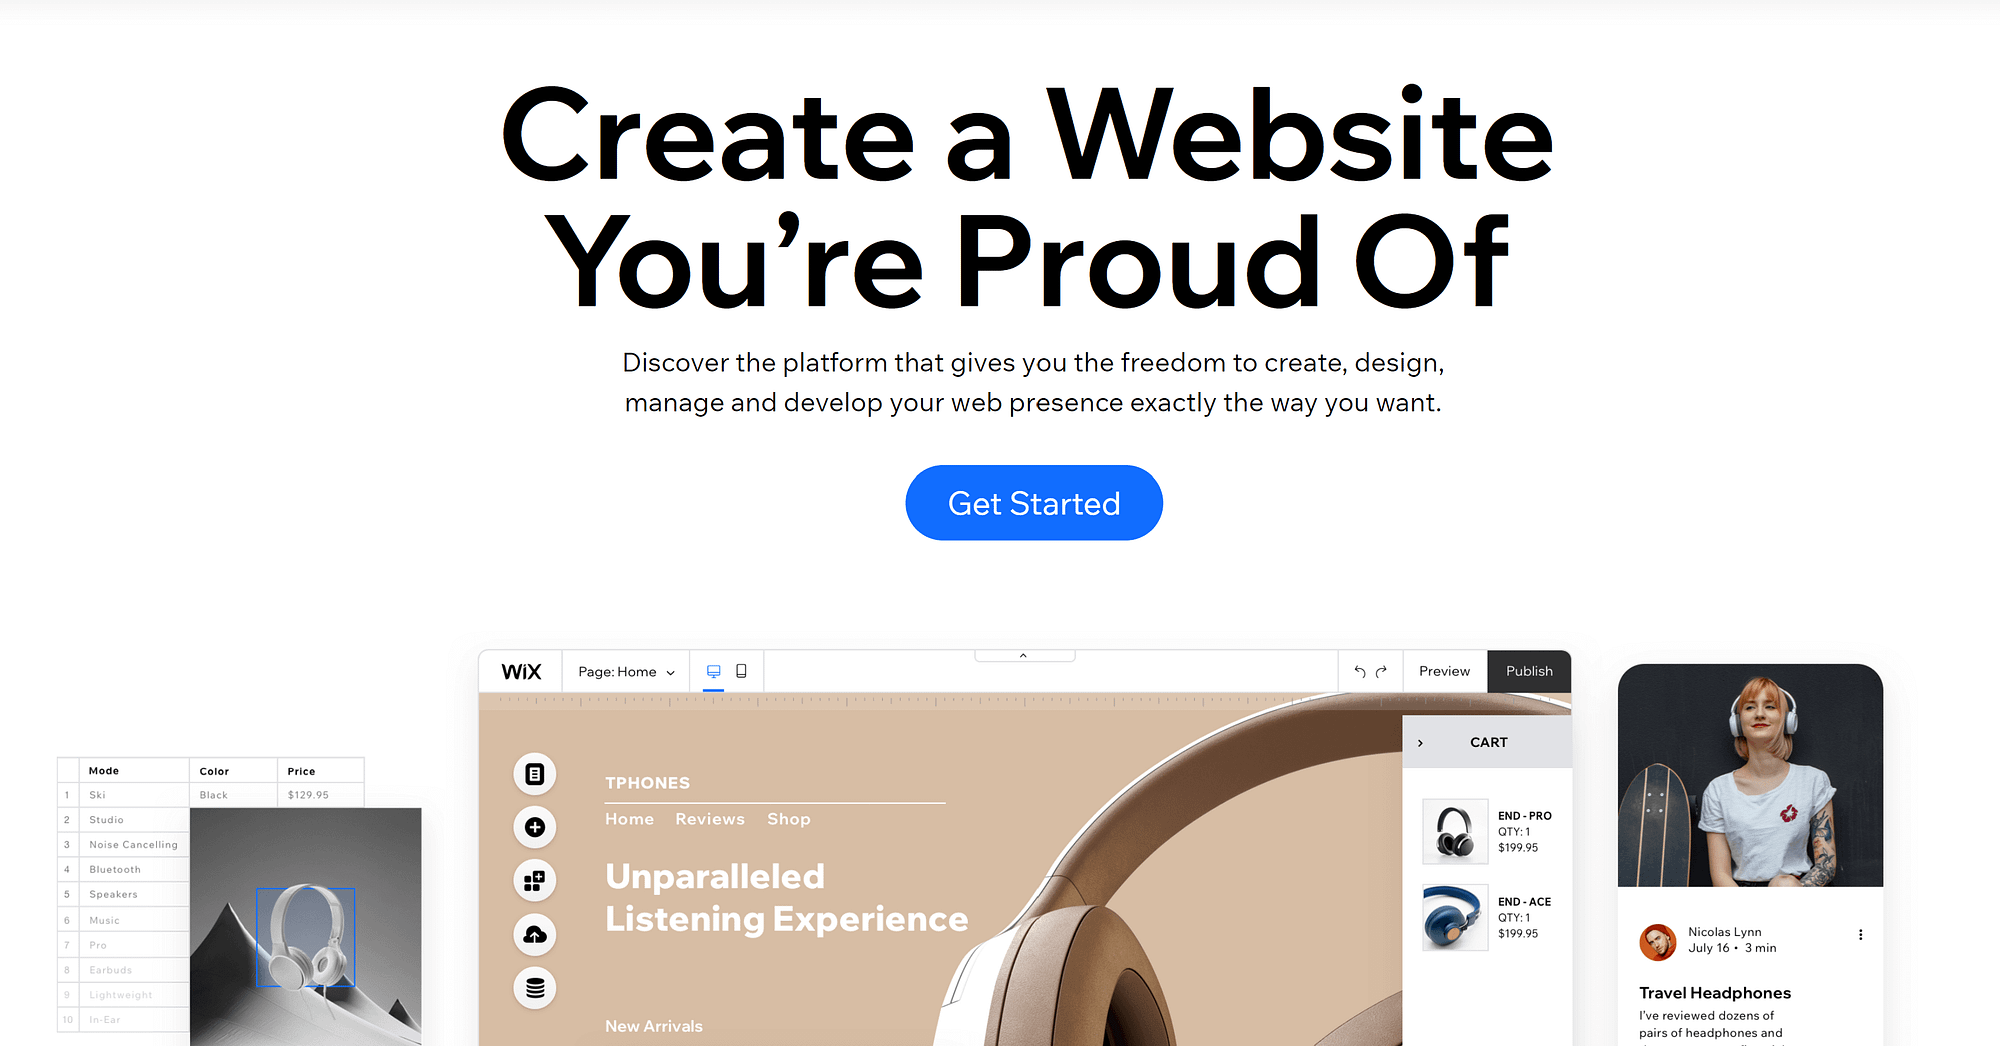 The homepage for one of the best website builders for artists, Wix.